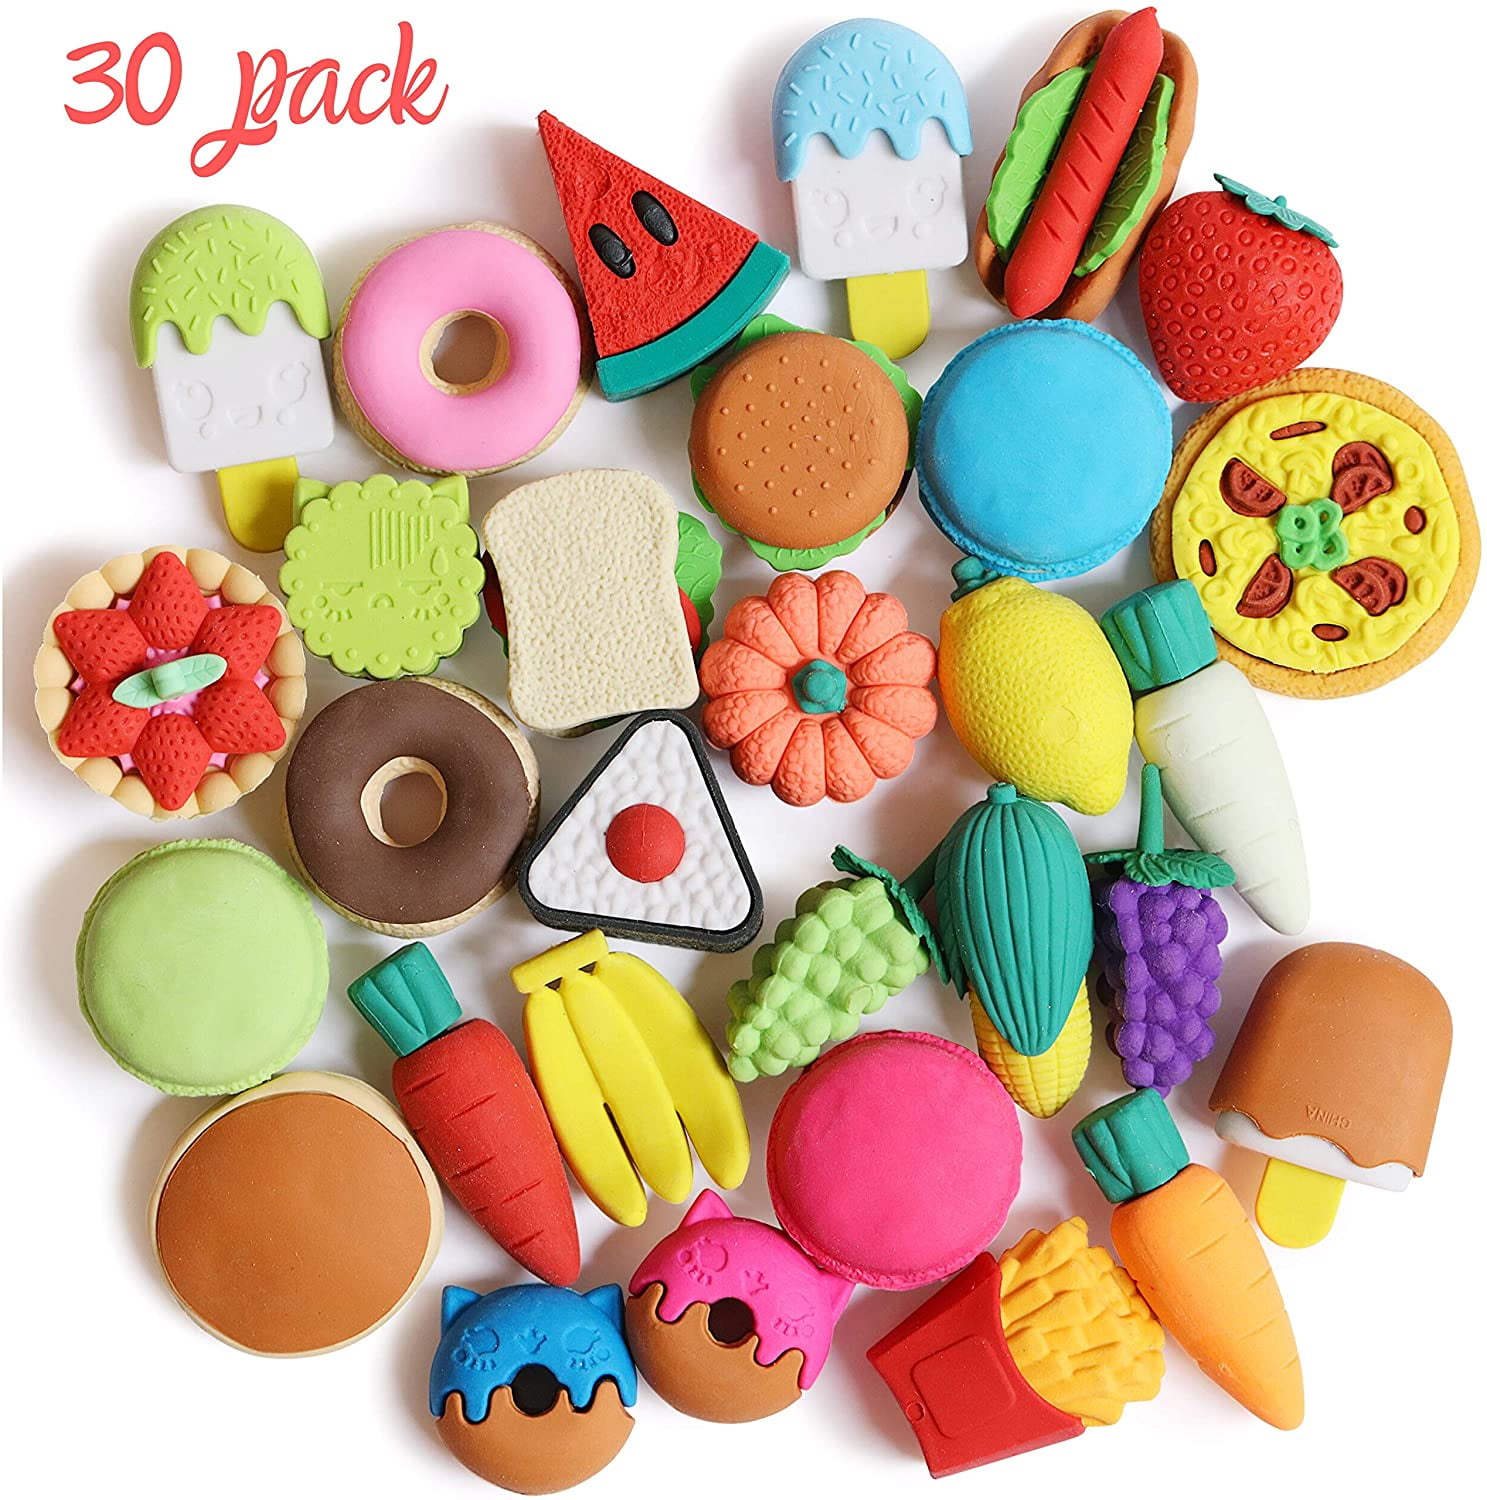 Rubbers Party Bag Puzzle! Novelty Treat 3 CRAYON Shaped Erasers Eraser 